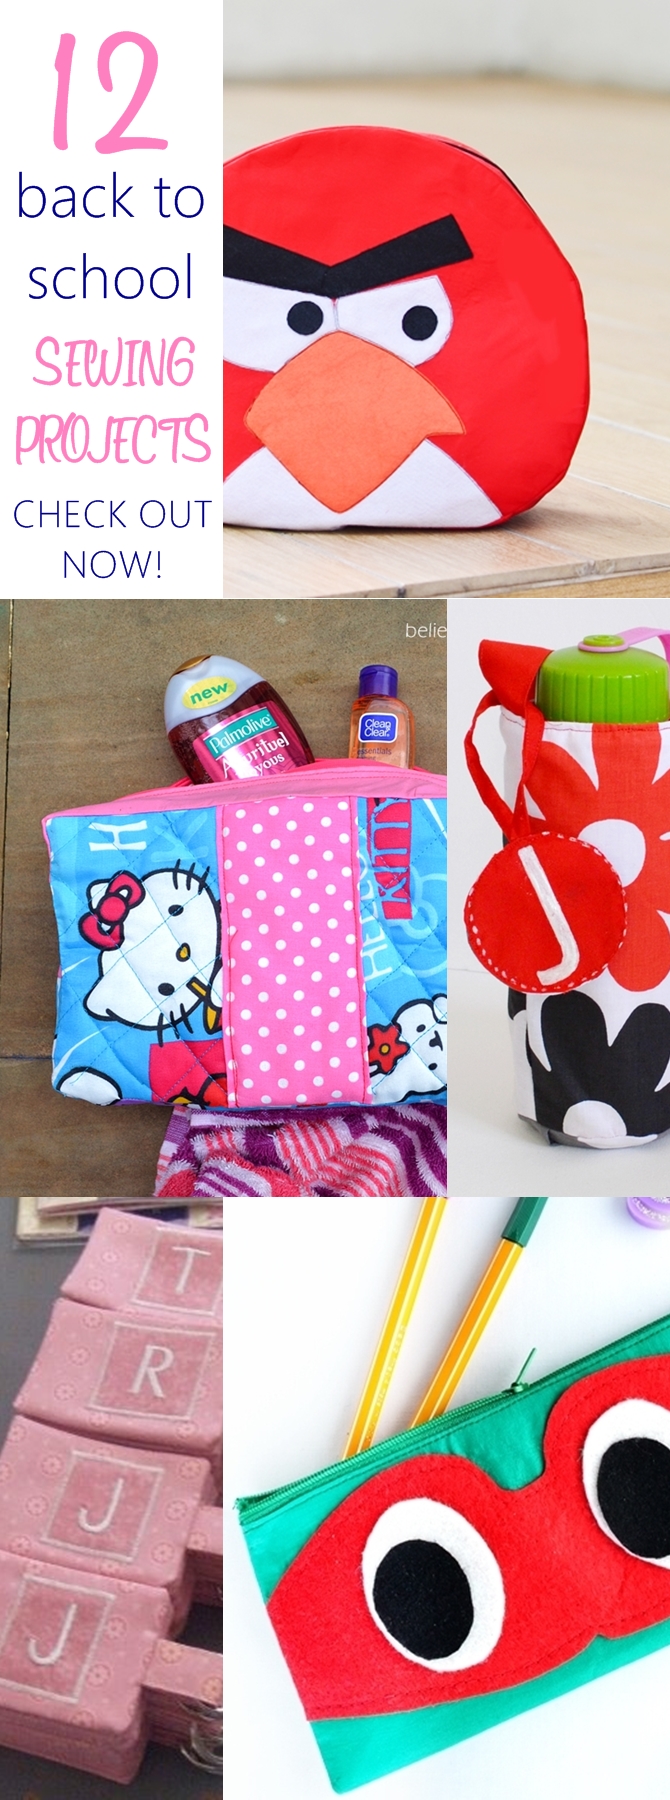 12 Back to School Sewing Ideas with Free Patterns on sewsomestuff.com School season is starting and it can get pretty pricey buying all the supplies. Here are some simple sewing projects that you can make for school and cut down the cost. Check them out now.